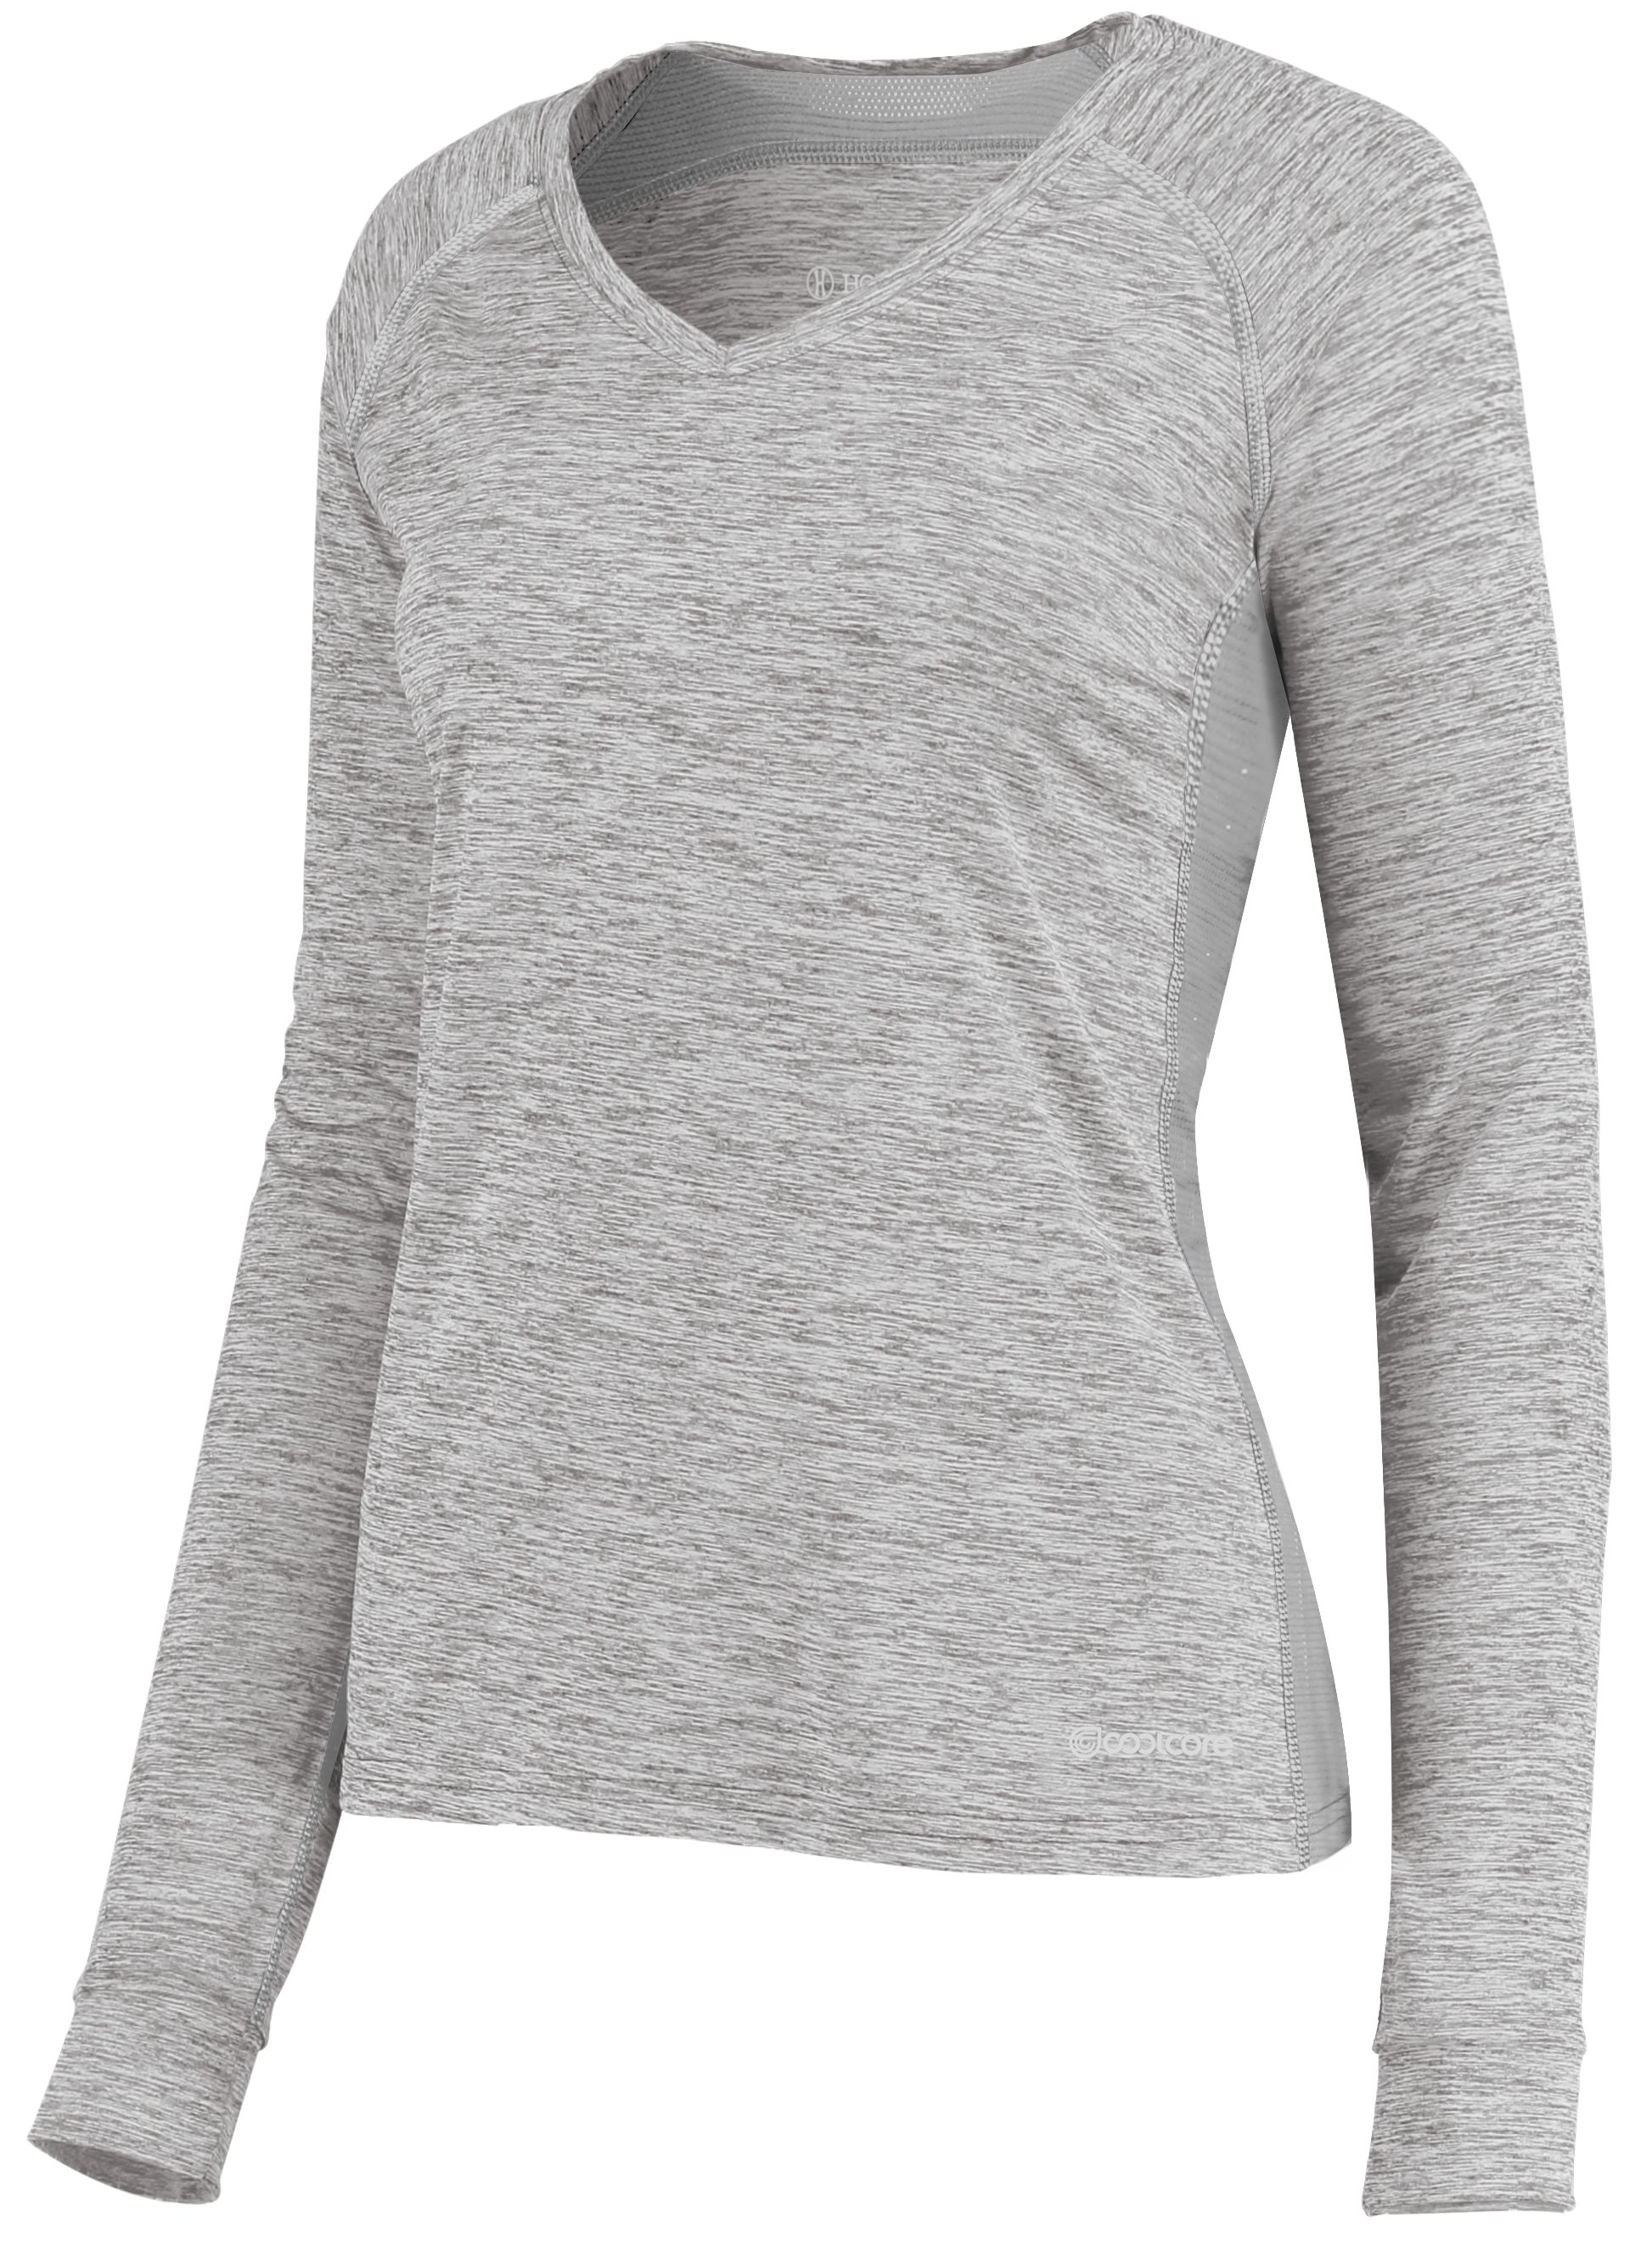 Selected Color is Athletic Grey Heather